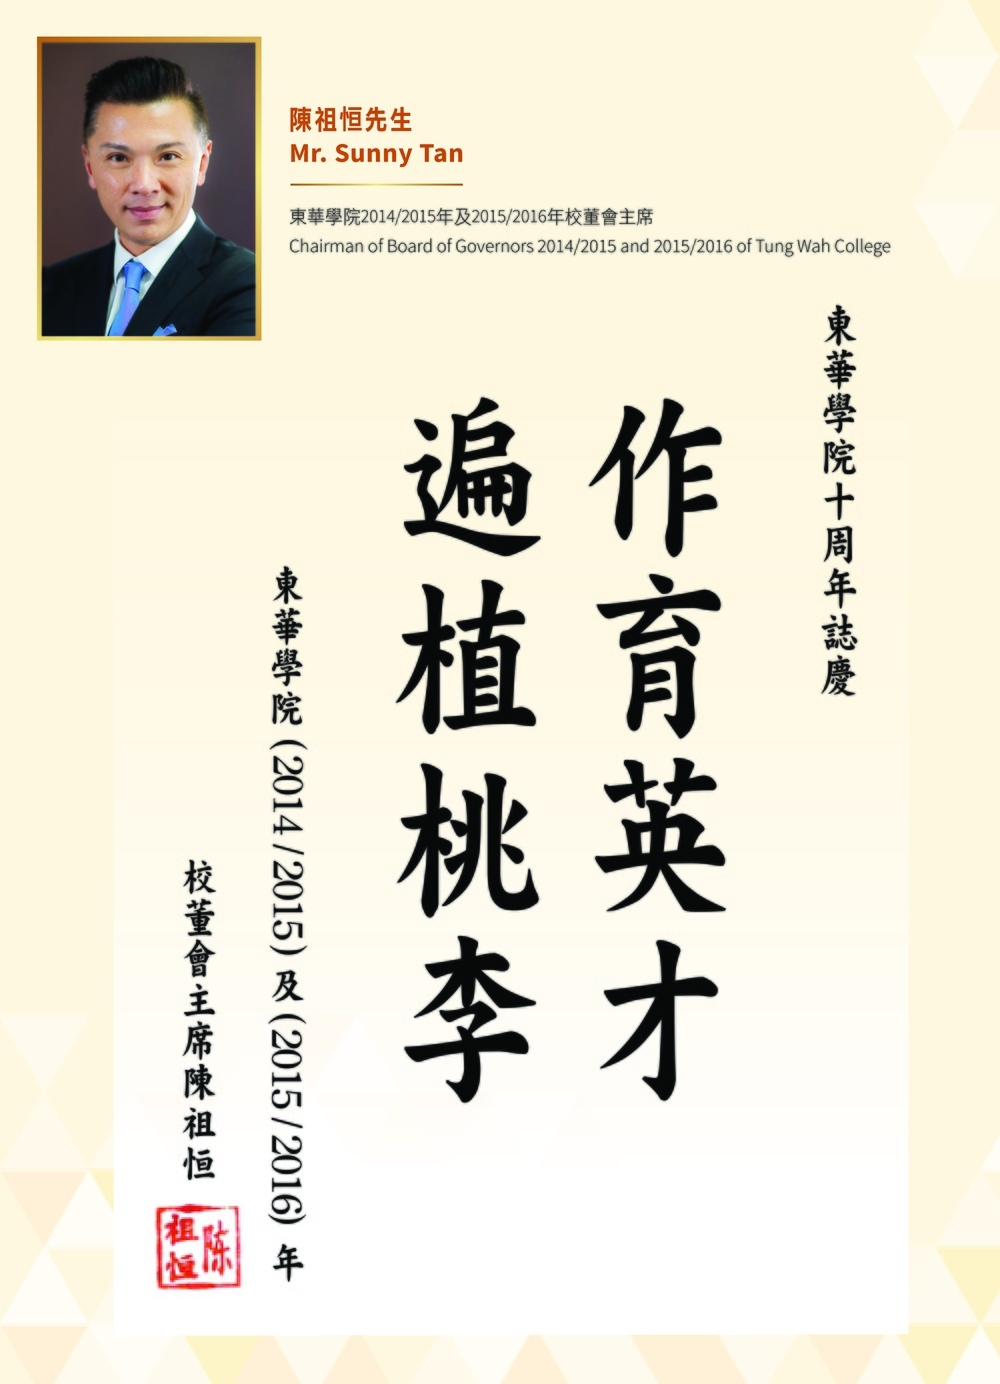 Chairman of Board of Governors 2014/2015 and 2015/2016 of Tung Wah College